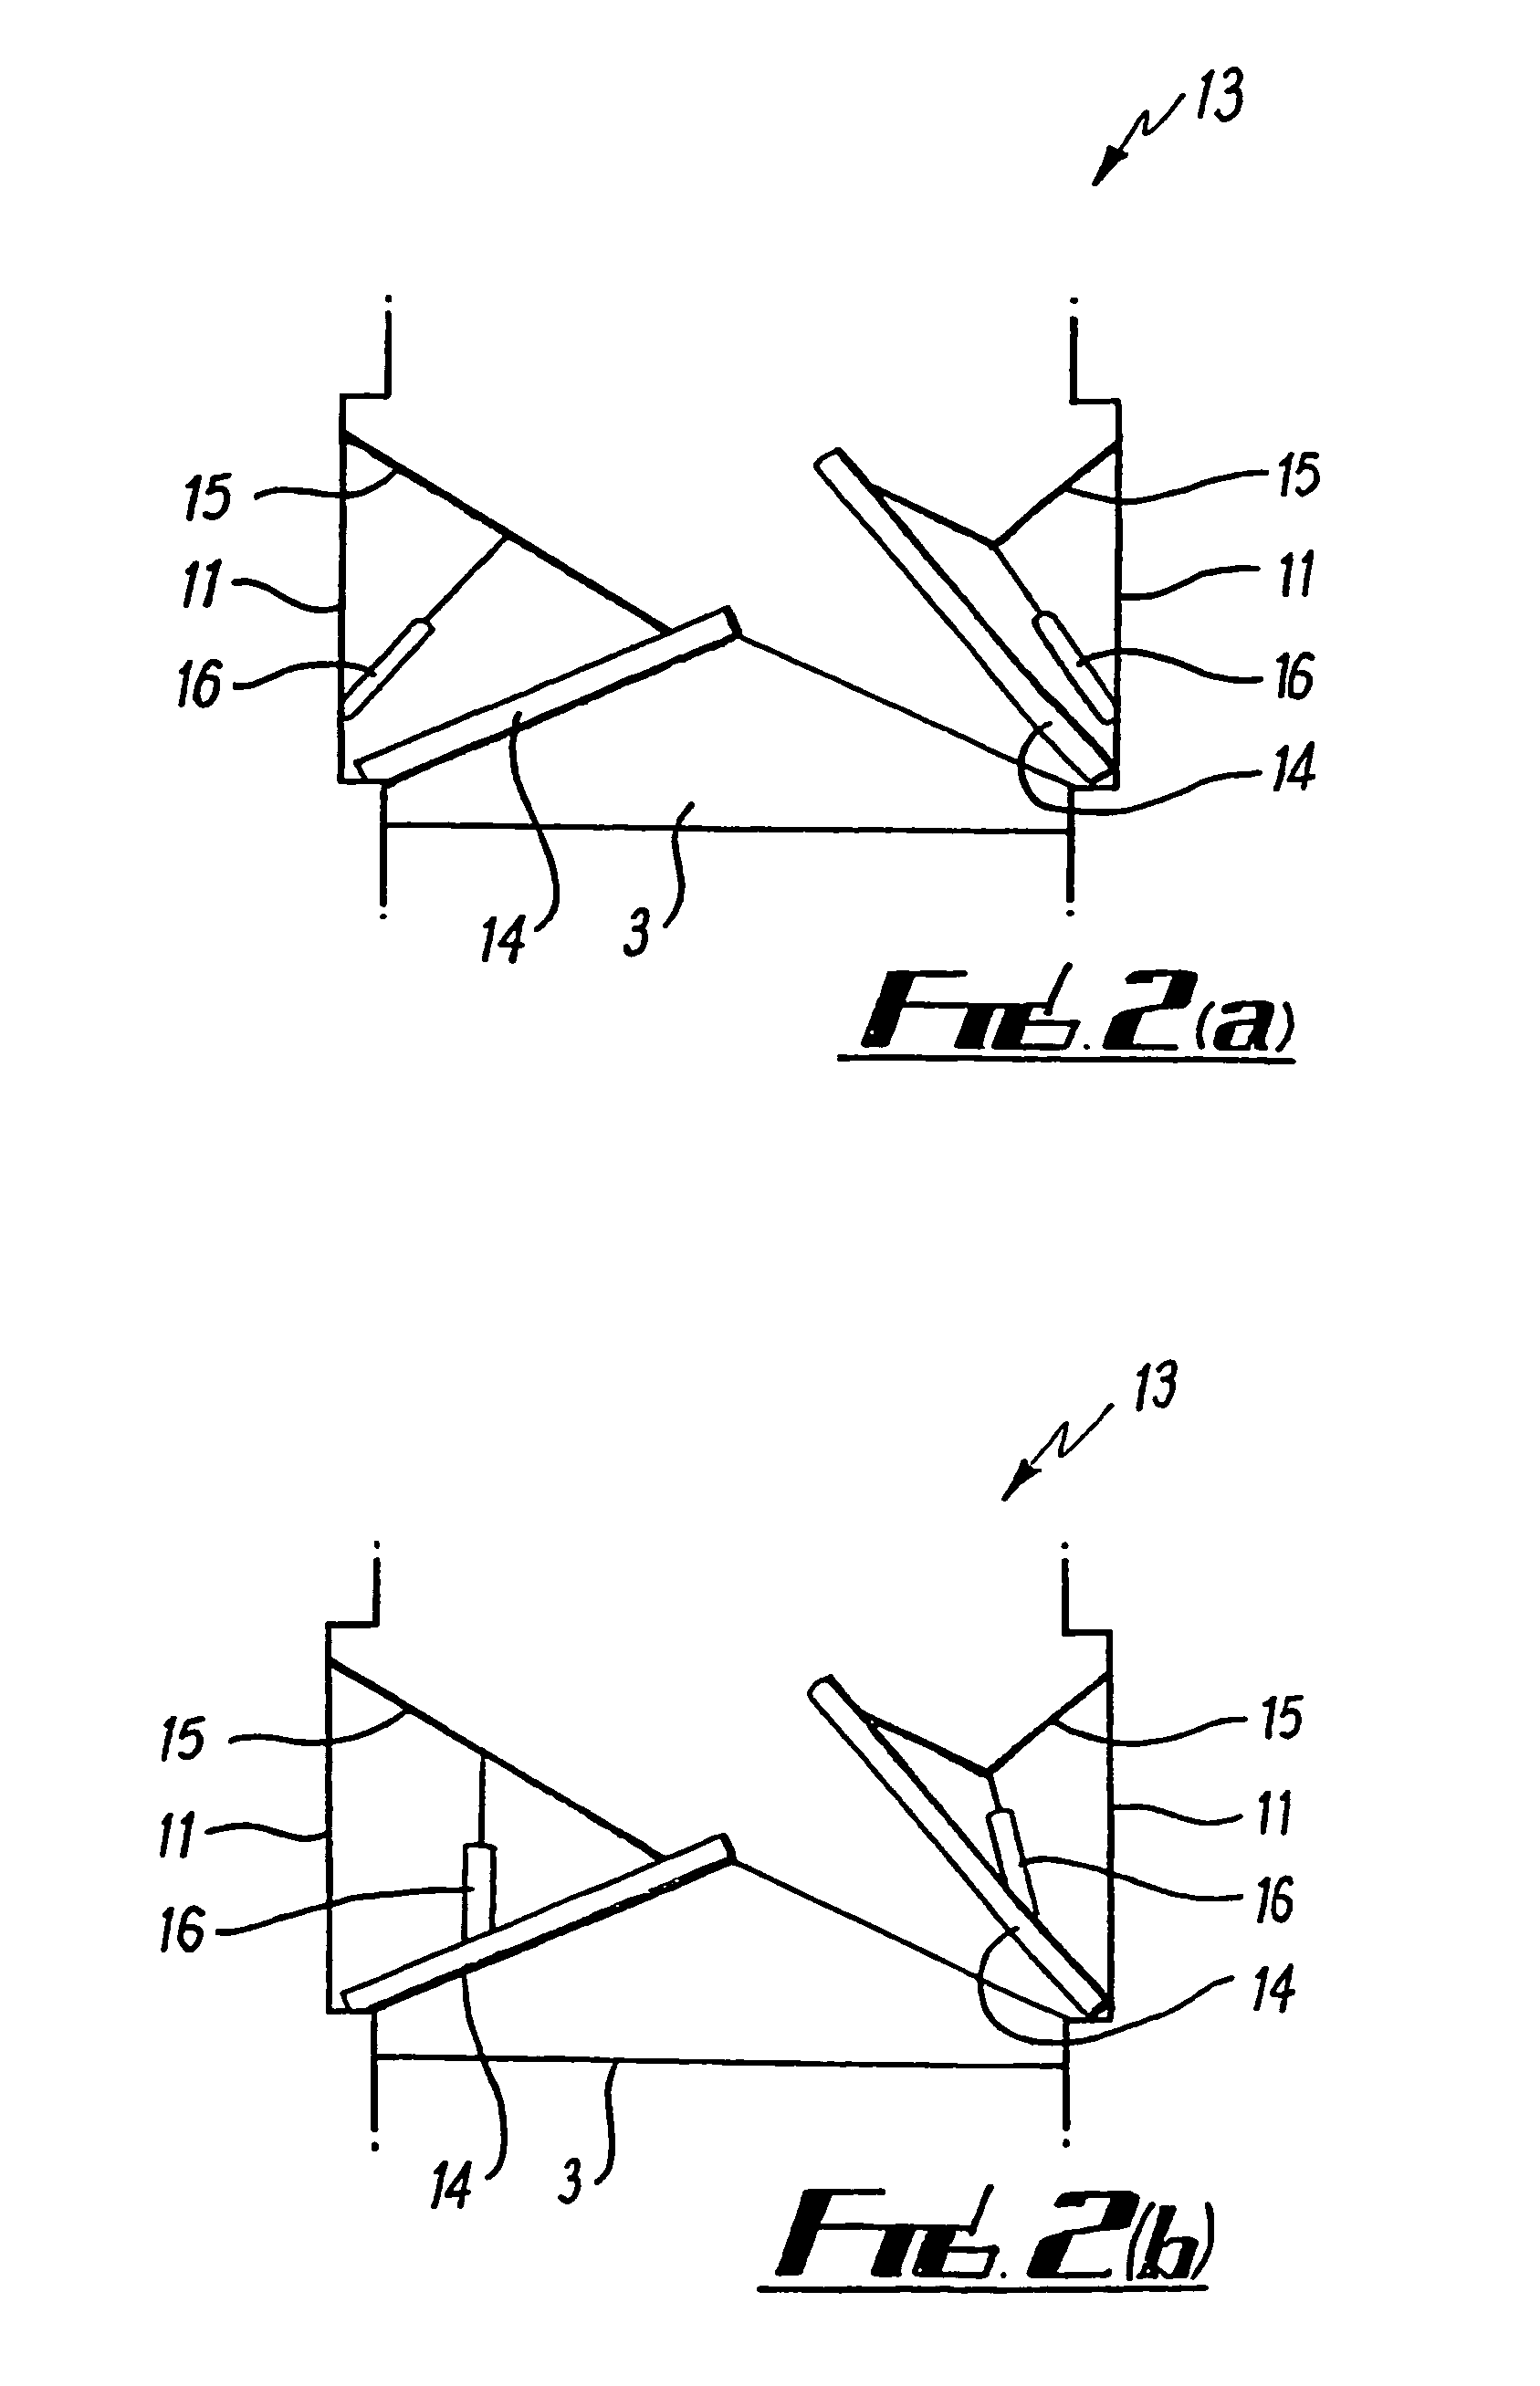 Watertight gate having gate leaf connected to foldable support